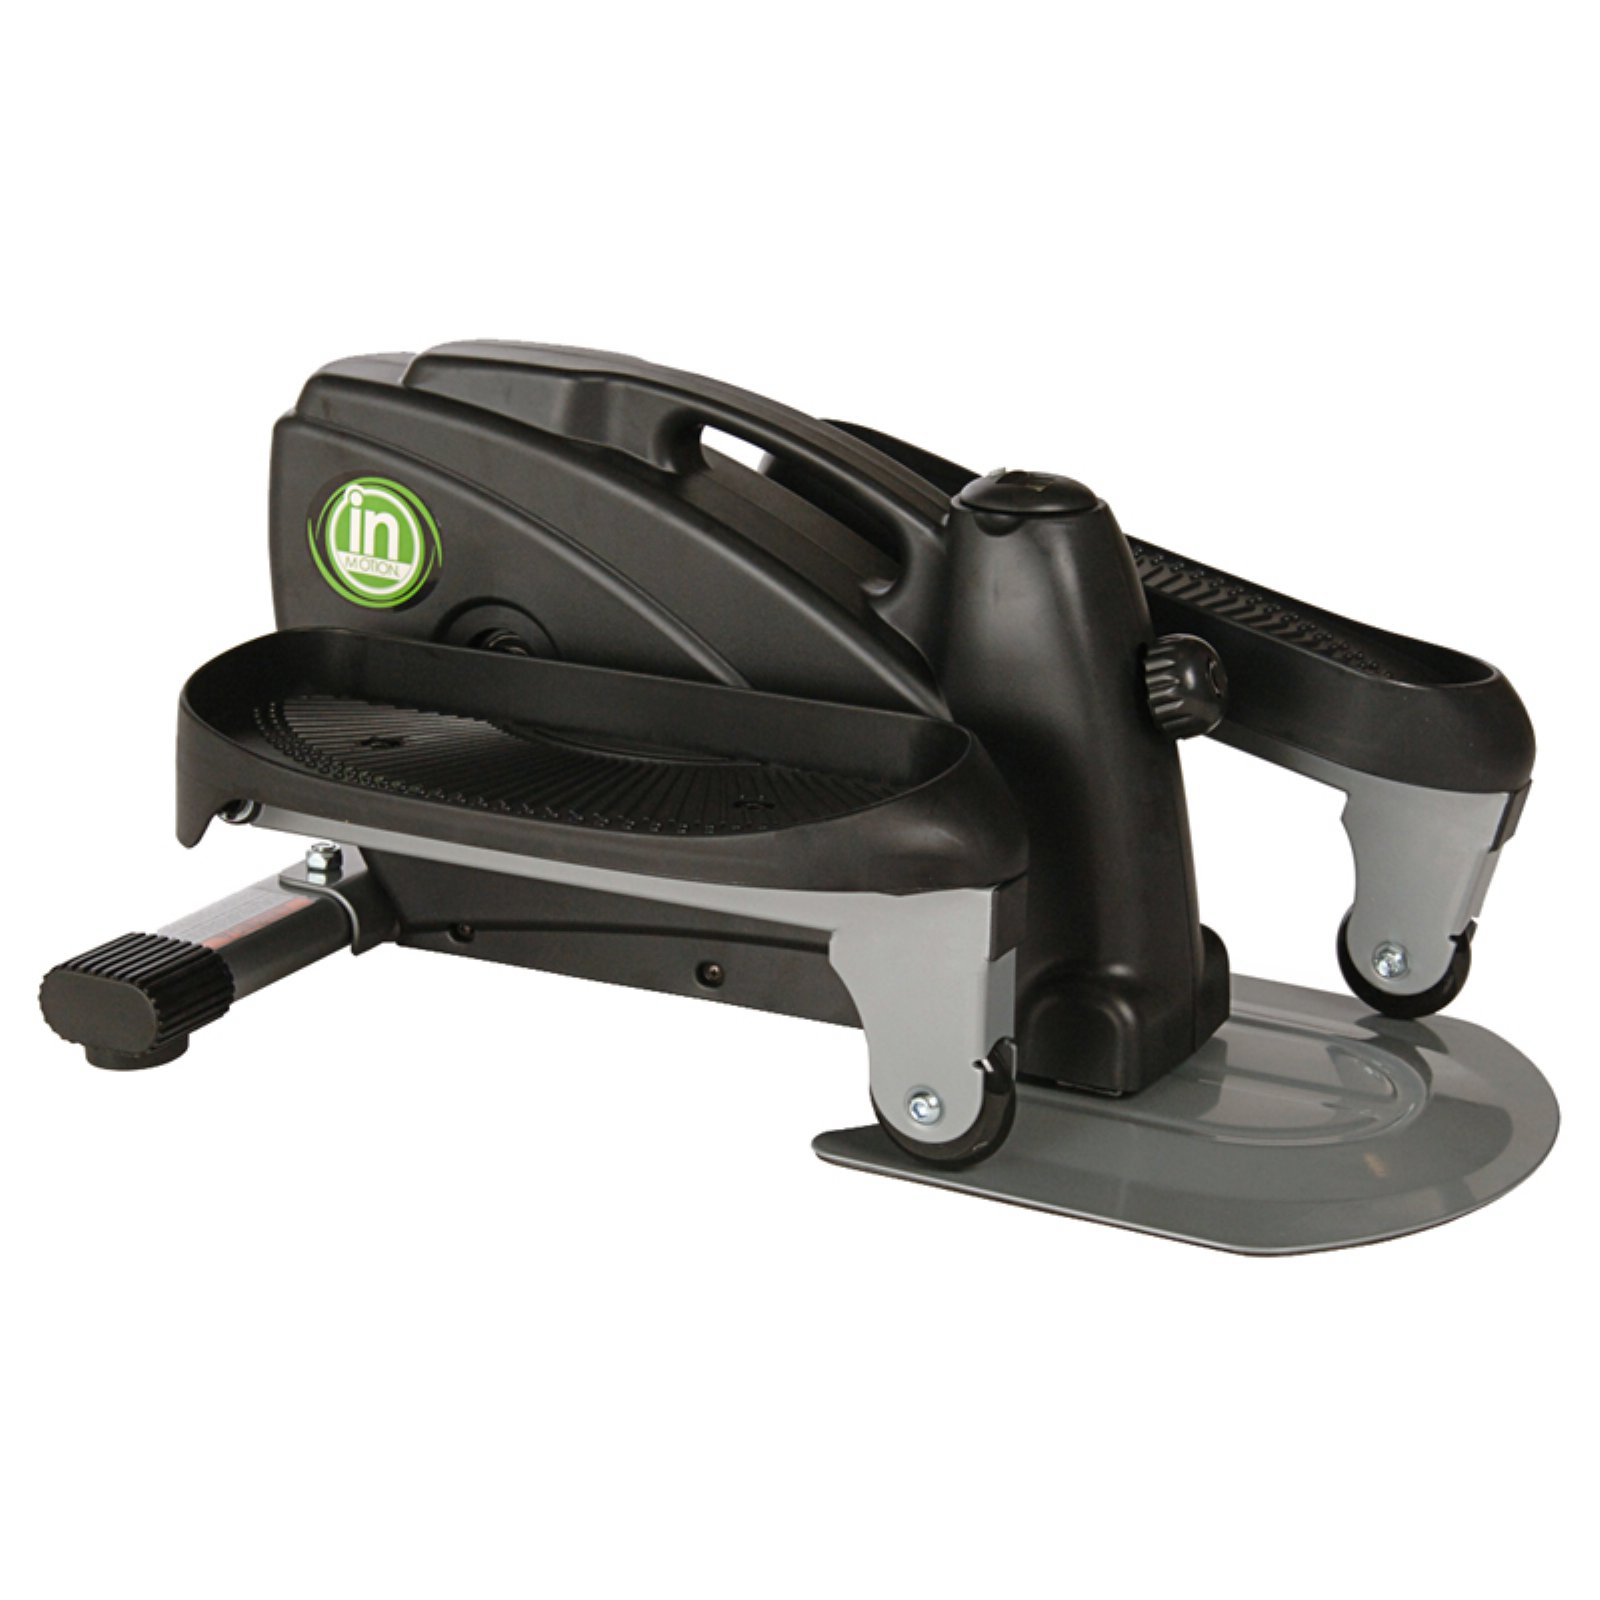 Compact designAdjustable tensionFitness monitorLarge, non-slip pedalsEasy carry handle - image 1 of 6